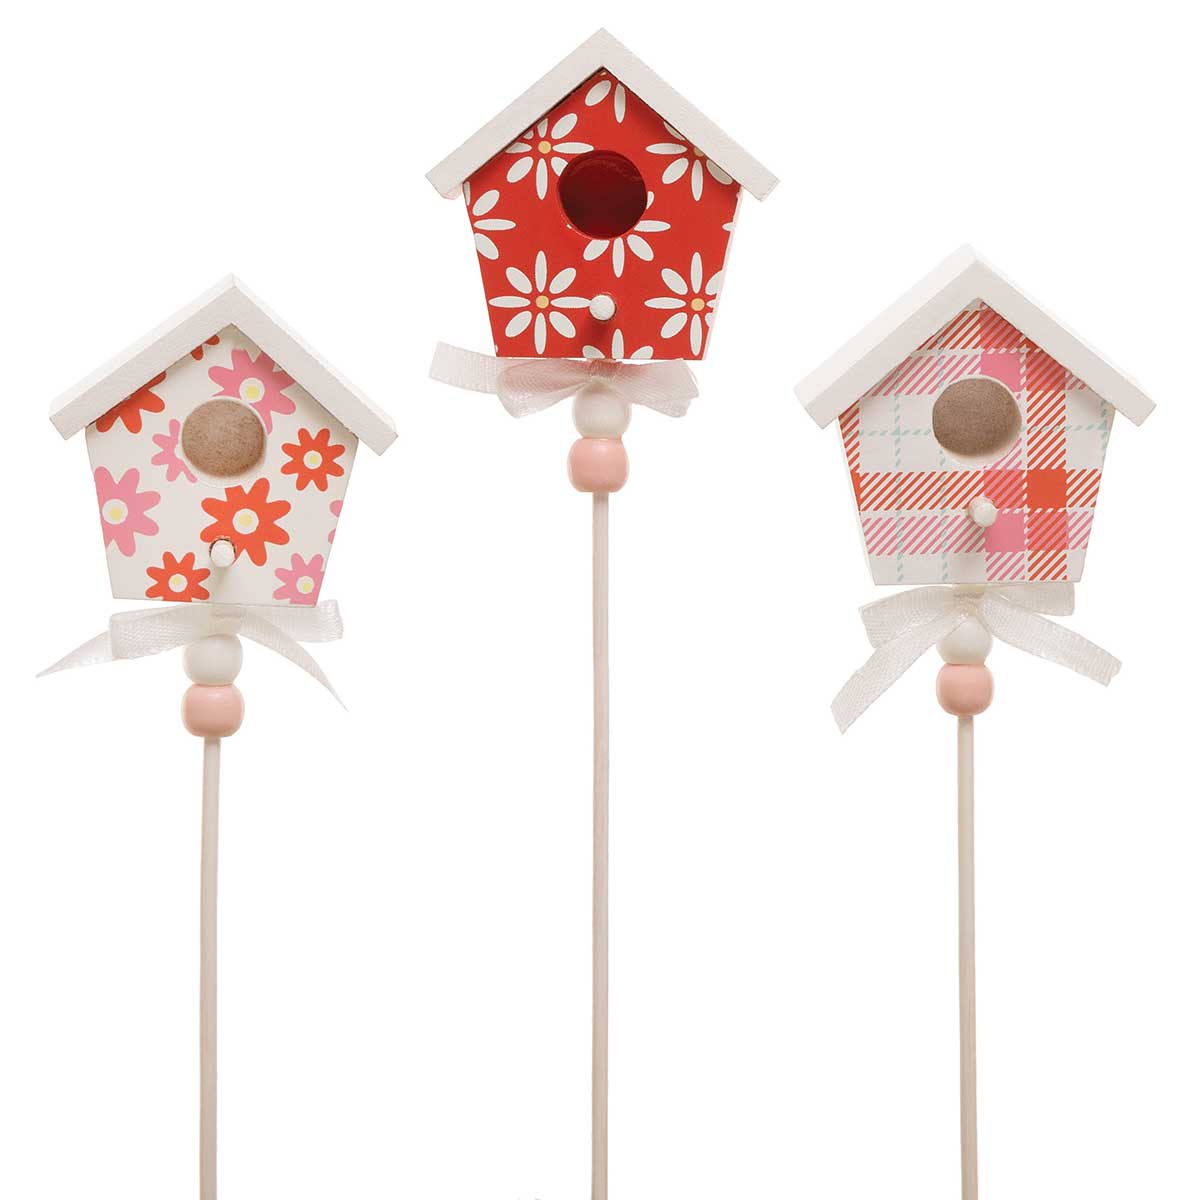 CORAL FAIR WOOD BIRDHOUSE ON STICK CORAL/WHITE